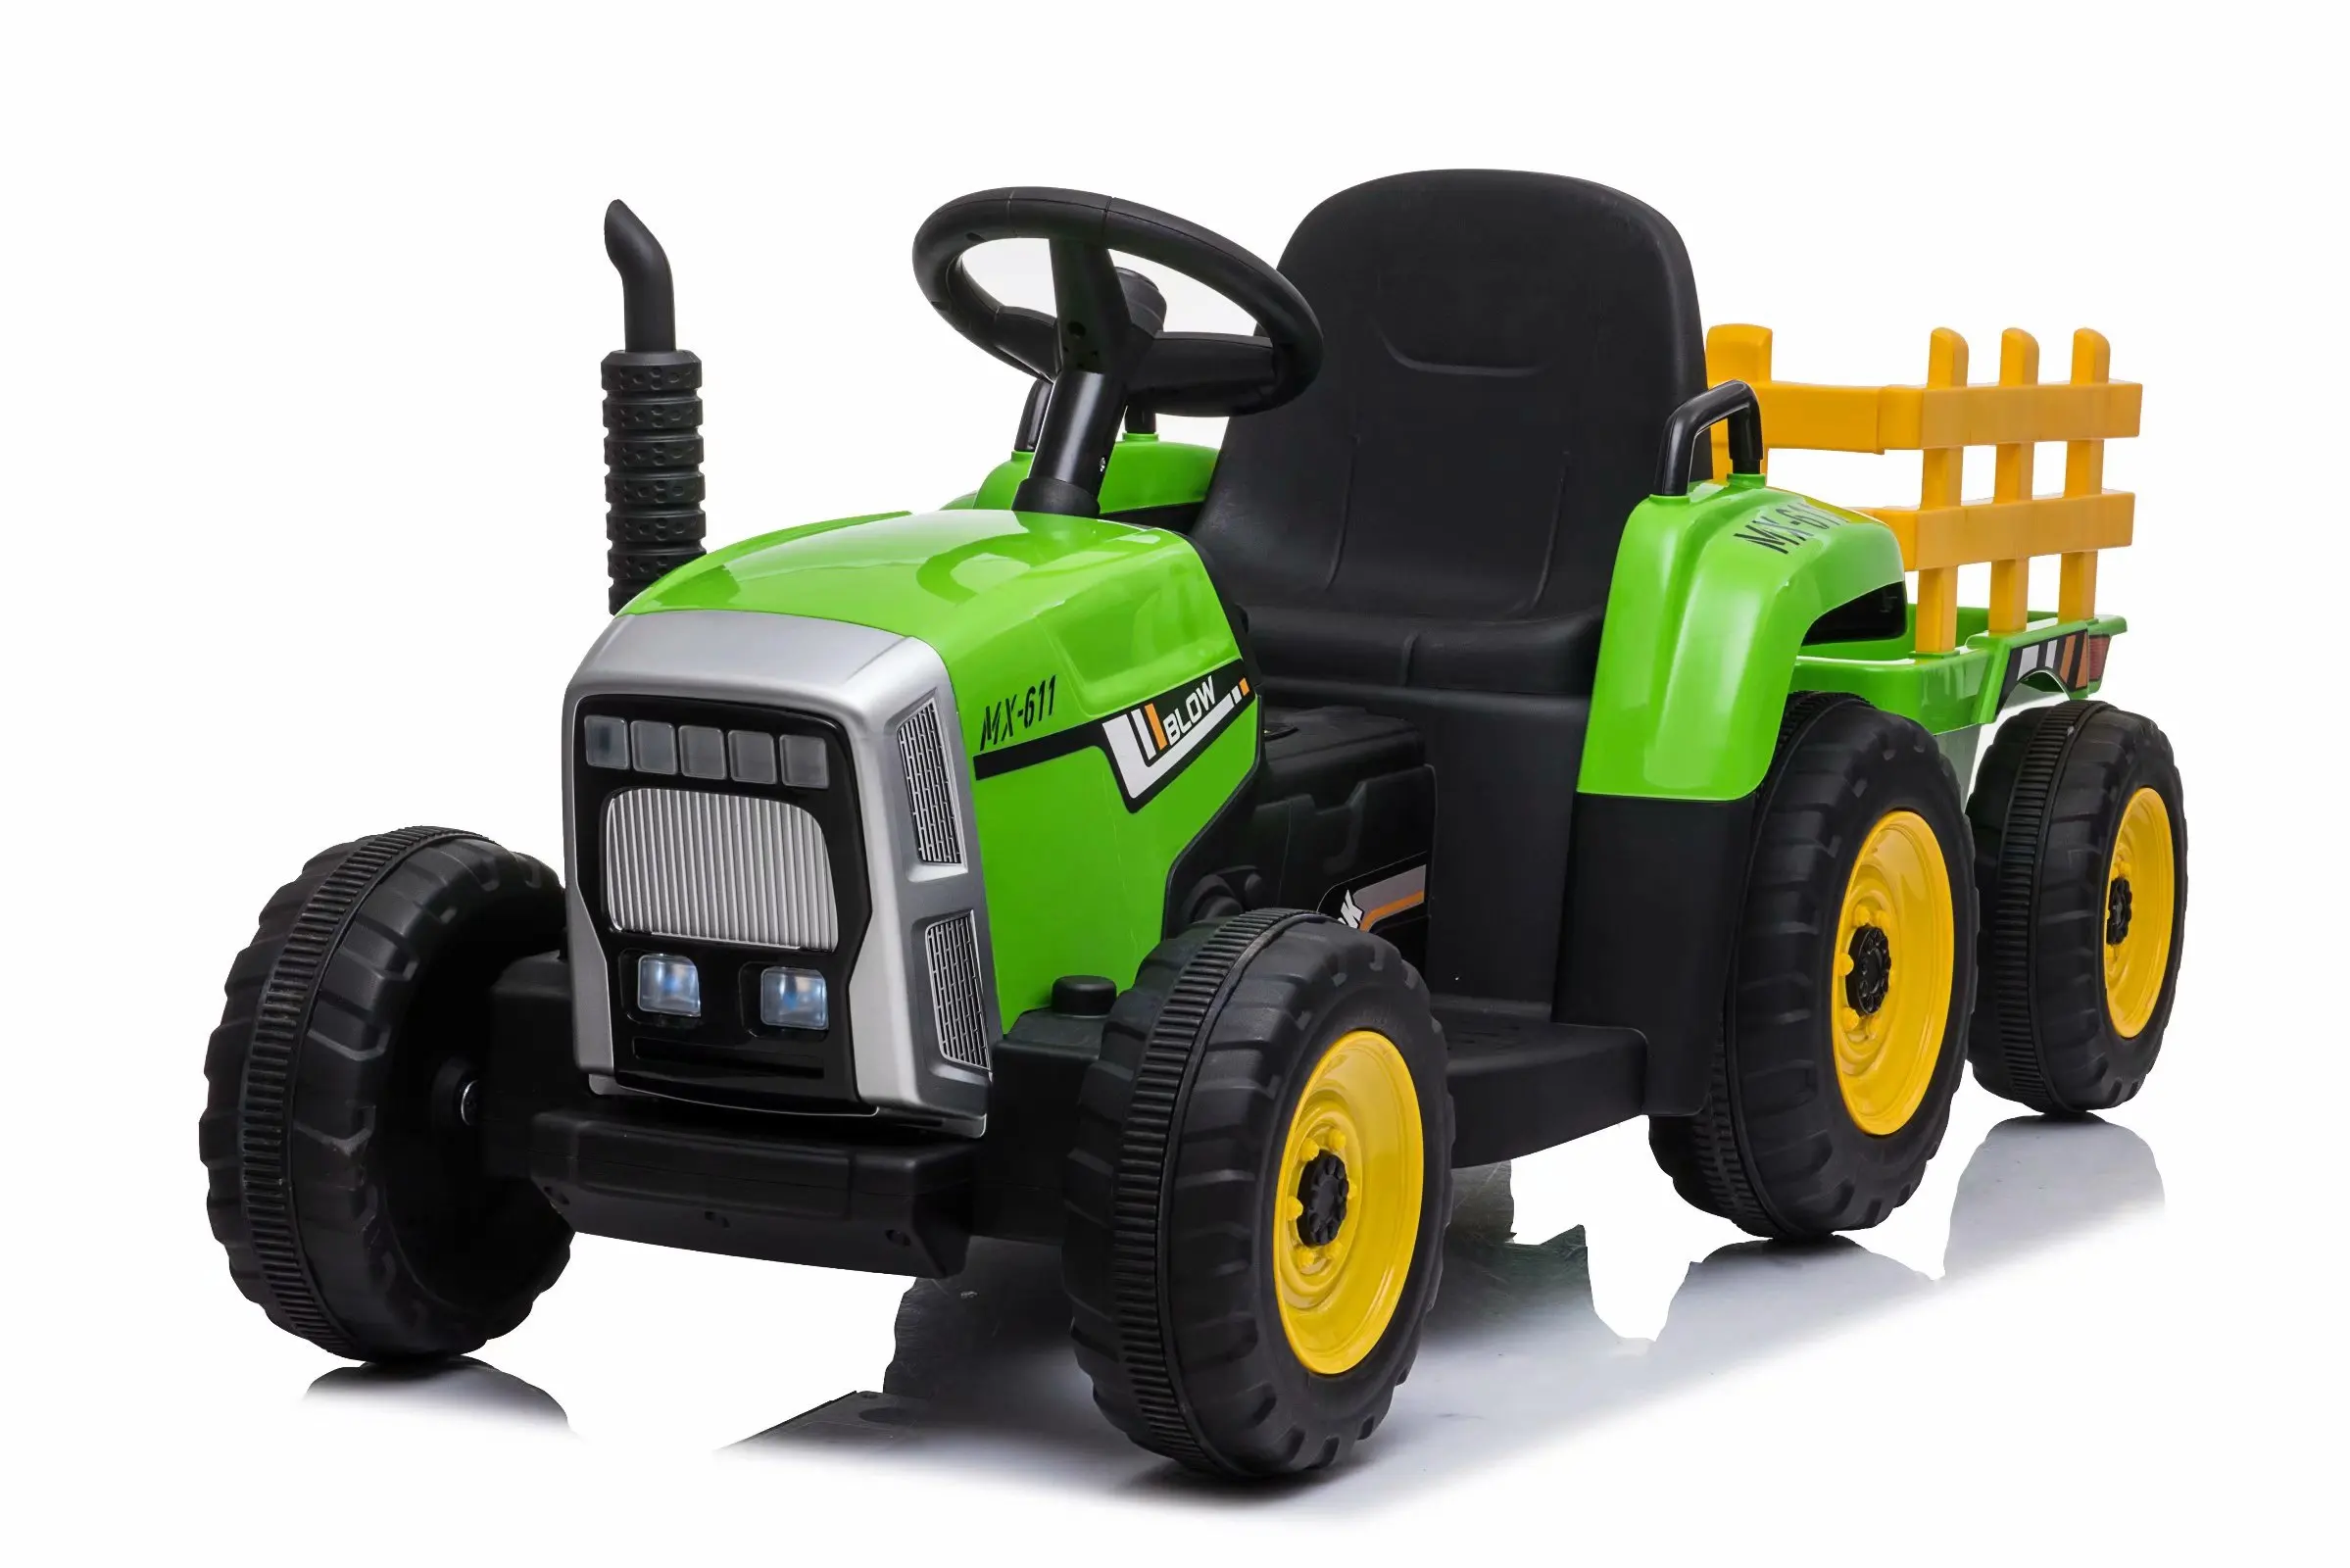 New Models 12v Big Tractor Xmx611 Electric Car For Toys With Remote Control Children's Ride On - Buy Remote Control Toy Cars,Kids Ride On,Battery Car For Kids Product on Alibaba.com